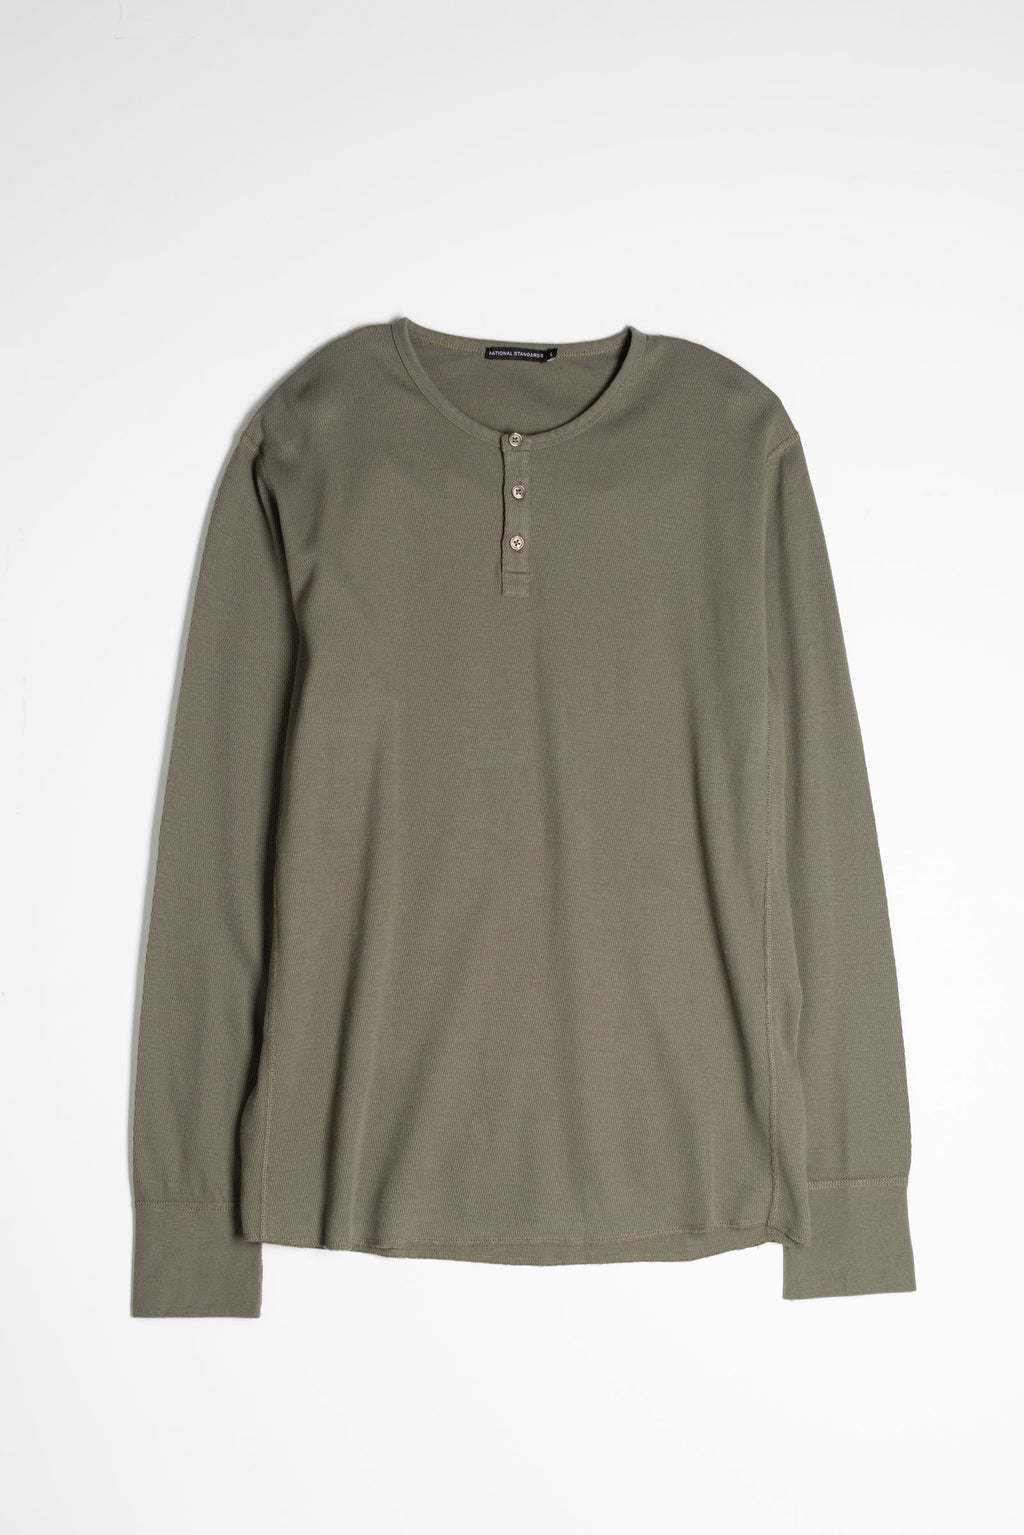 Mesh Thermal L/S Henley in Army Green 01